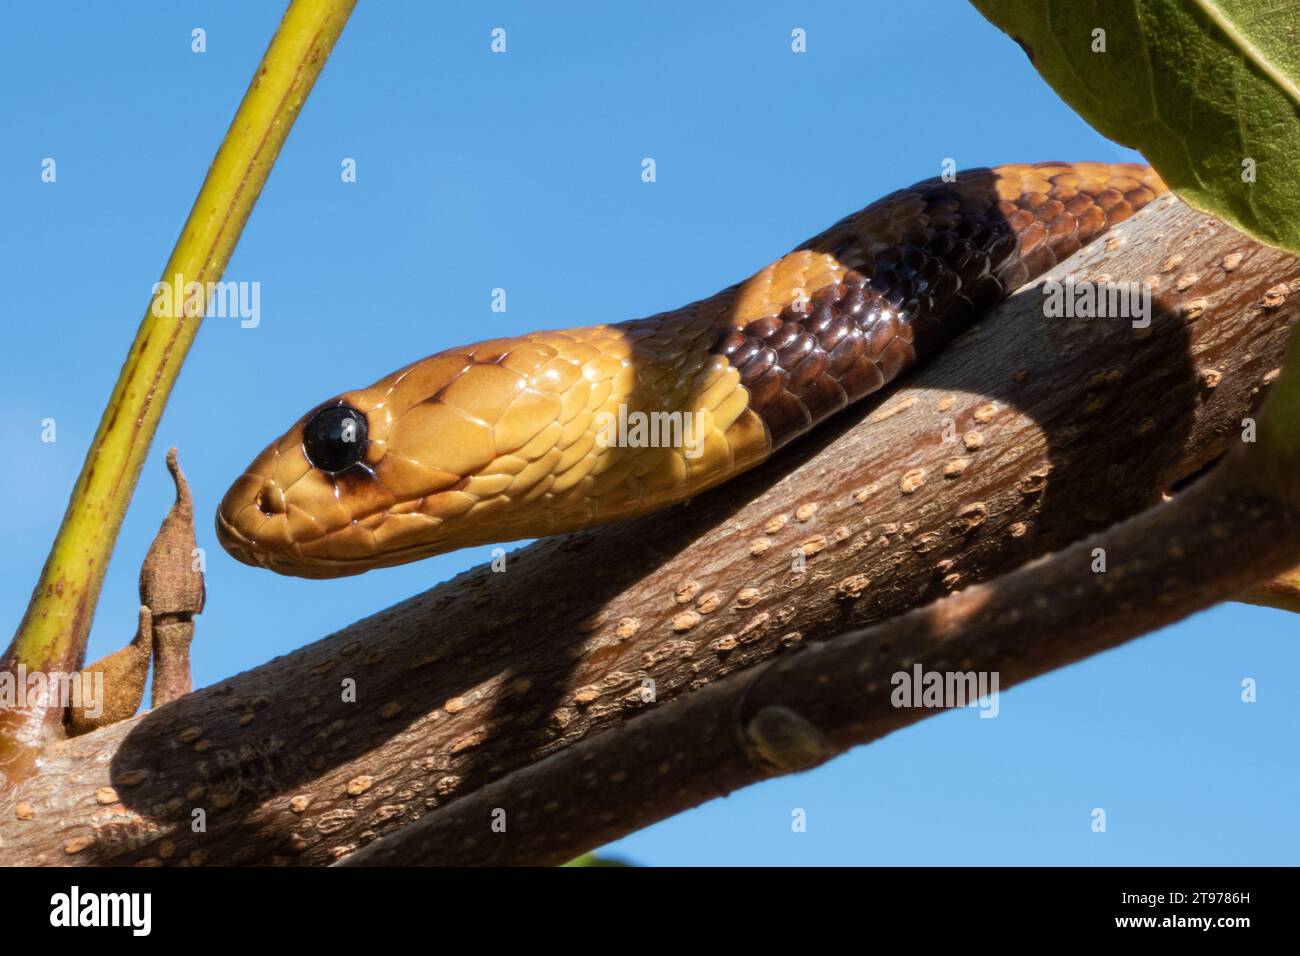 A close-up of a Cape cobra (Naja nivea), a highly venomous snake form South Africa is seen coiling around a tree branch Stock Photo